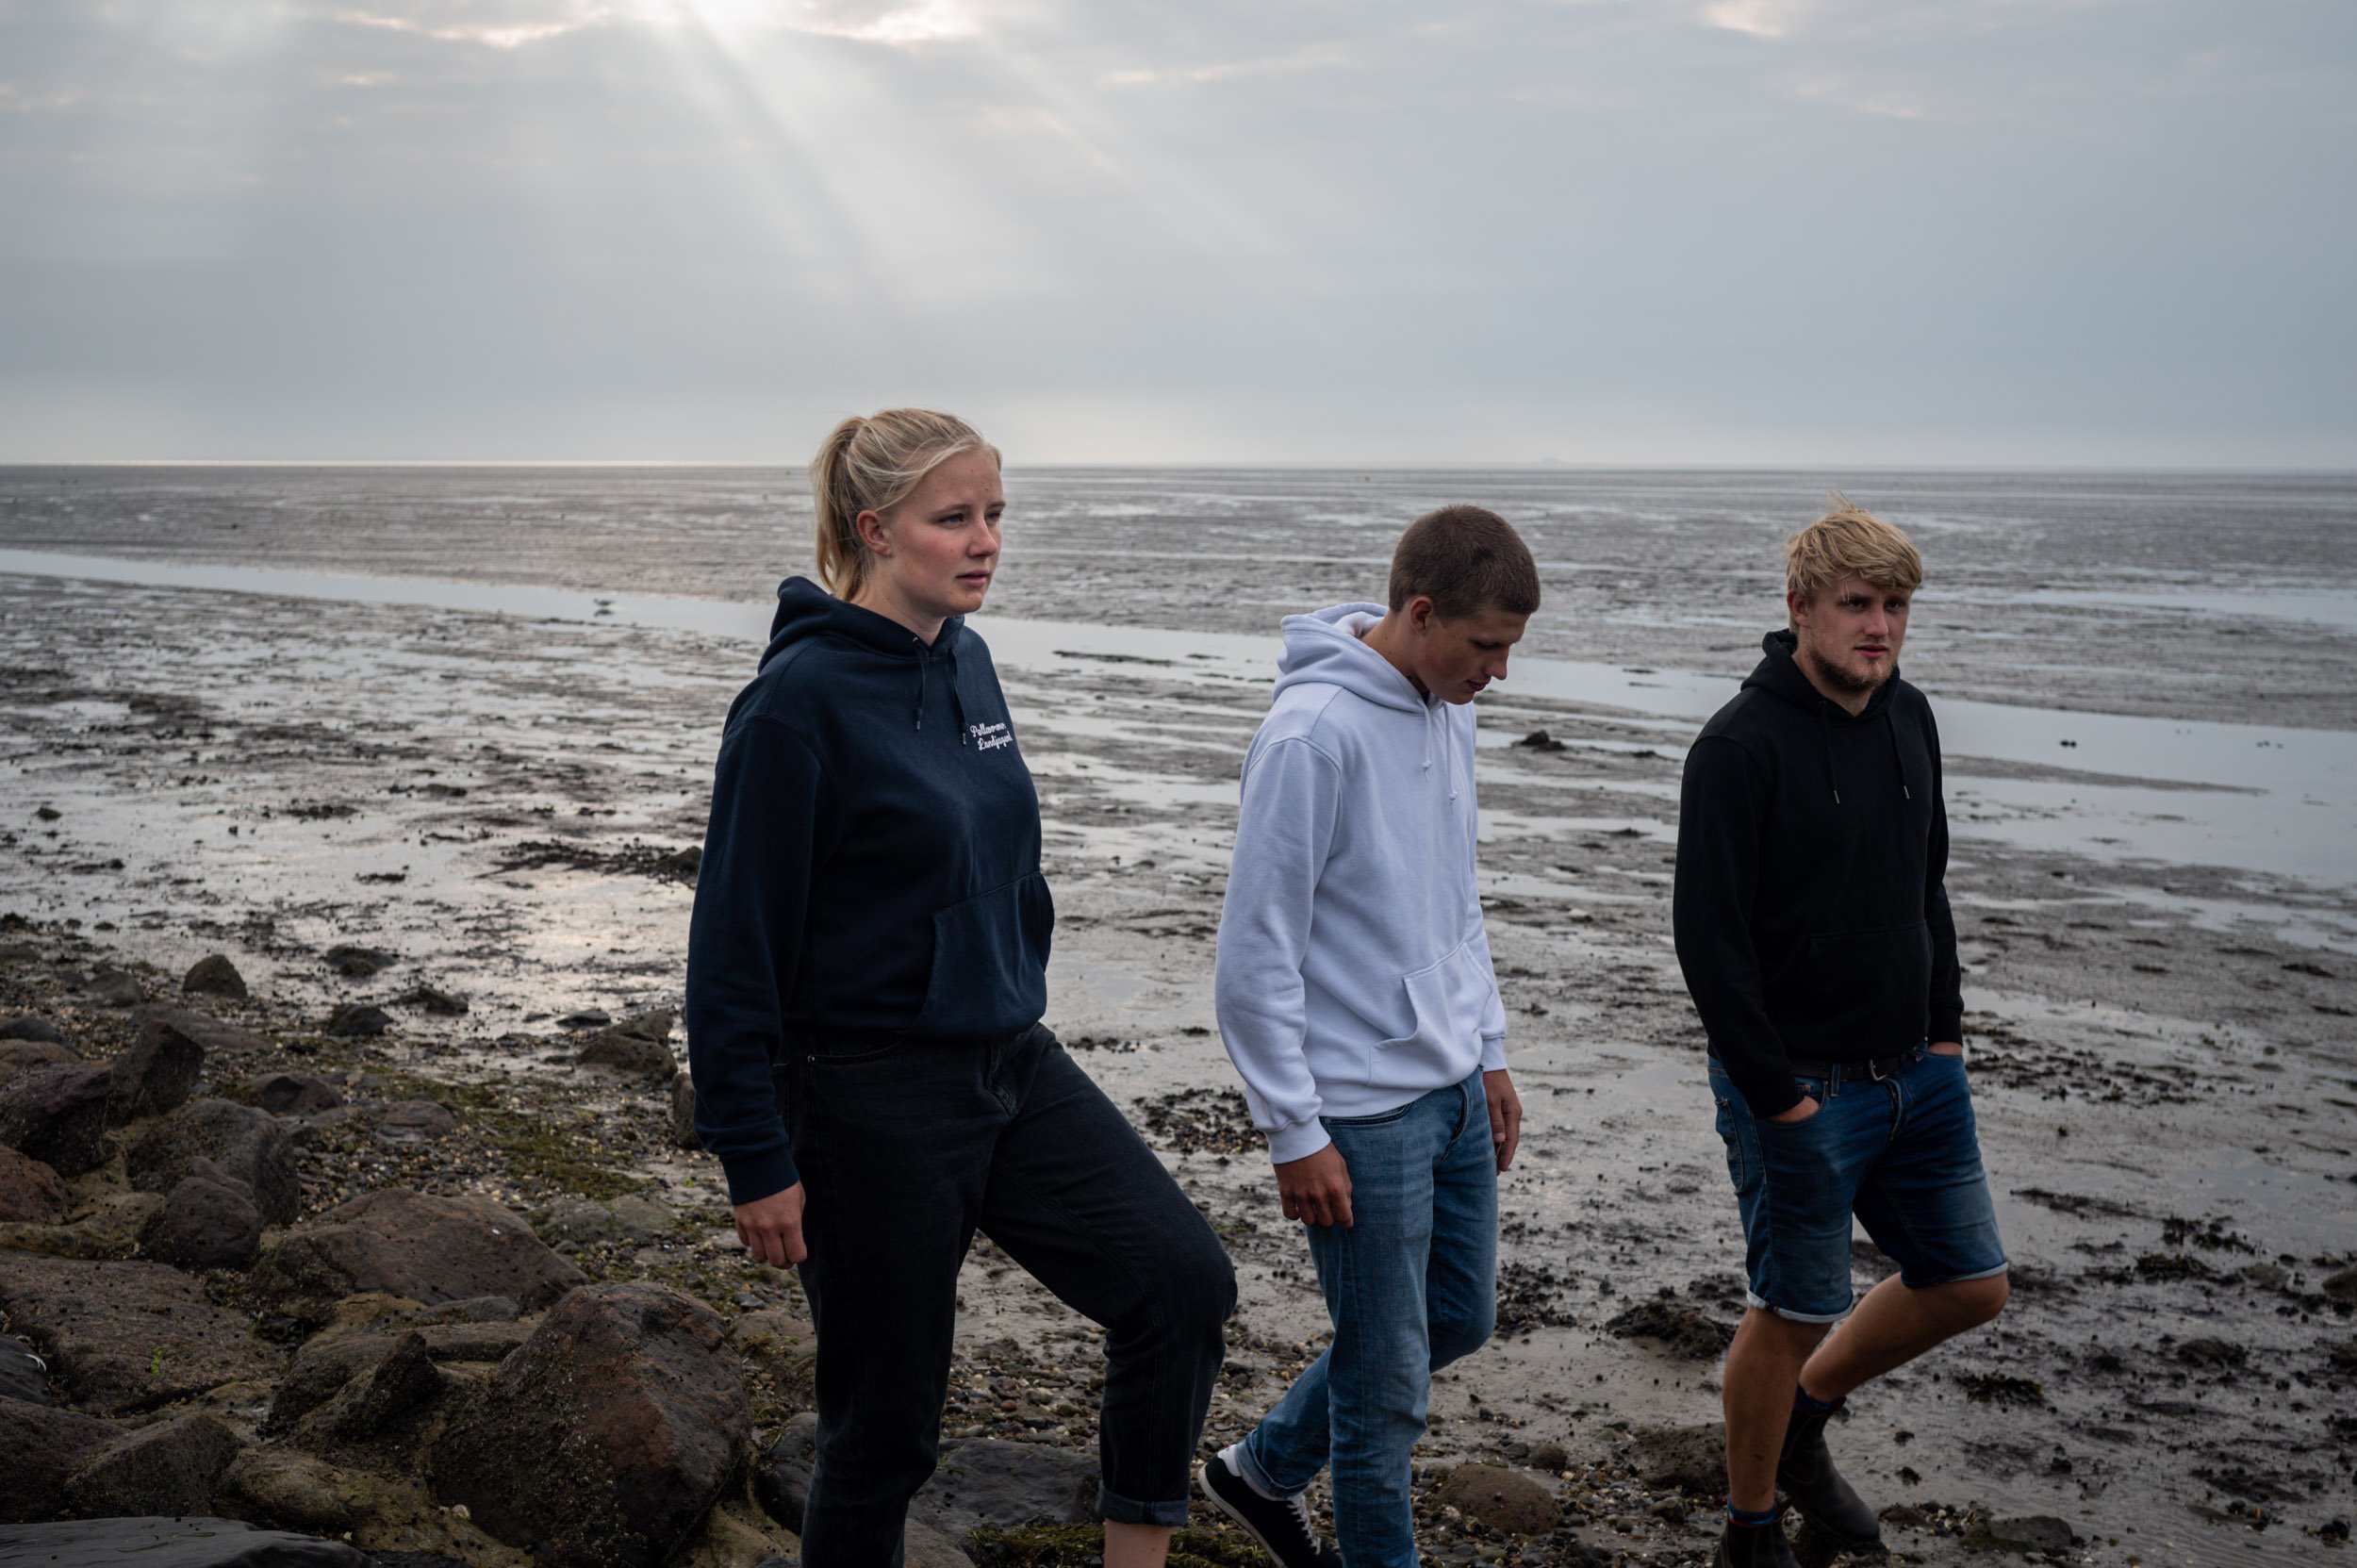  Backsen siblings Sophie, 23, Hannes, 19, and Paul, 21, on the island of Pellworm. Their family took Ms. Merkel’s government to court over its carbon dioxide emissions. 